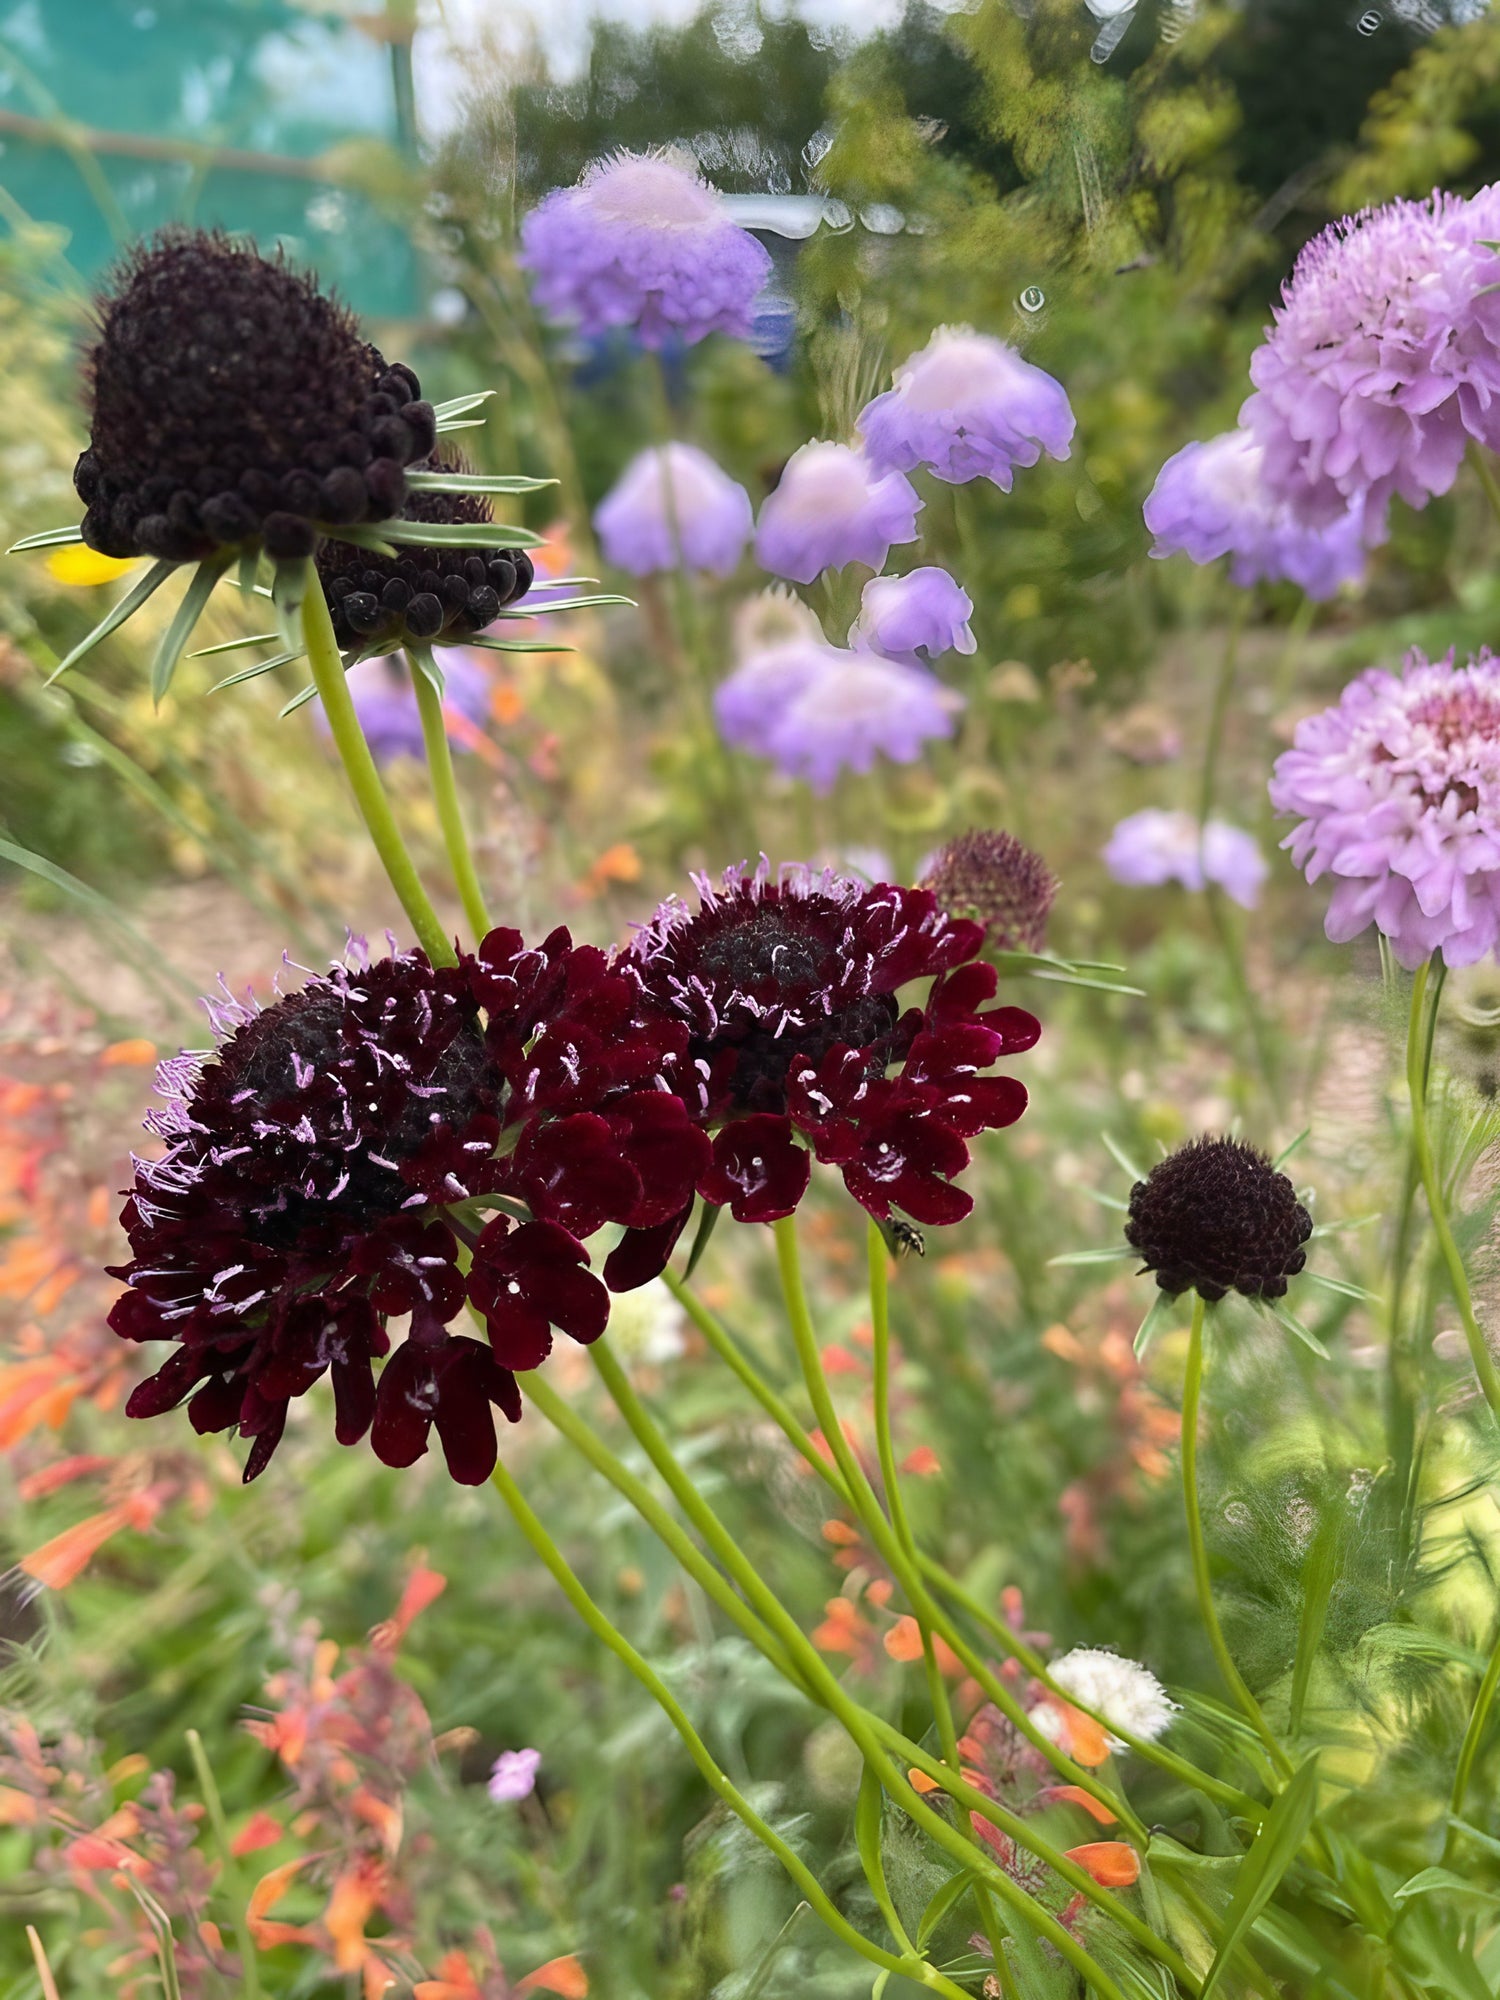 Scabious Black Knight flowers amidst a garden bed with dark foliage